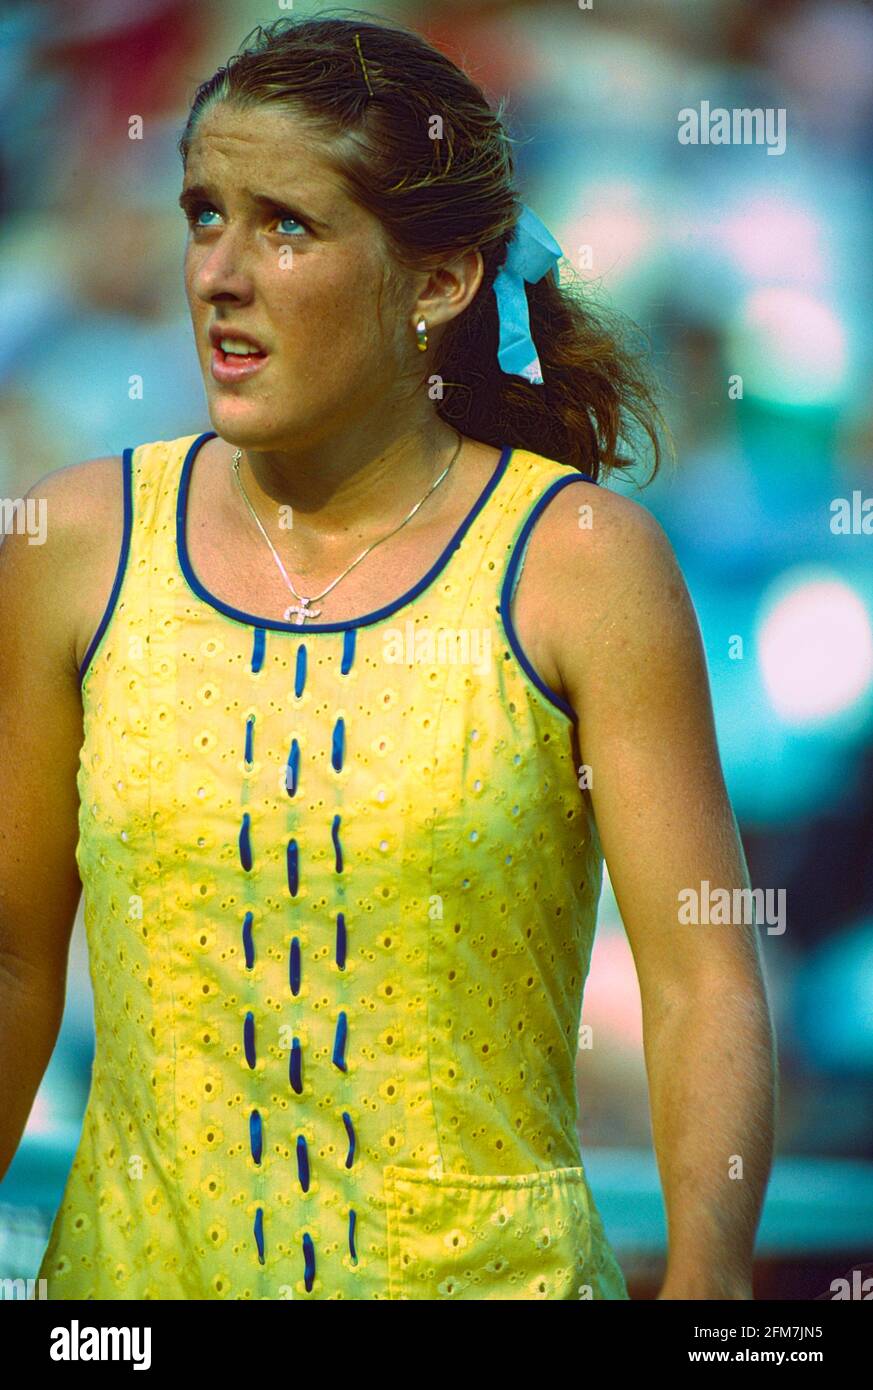 Tracy Austin (USA) competing at the 1980 US Open Tennis Championships Stock Photo